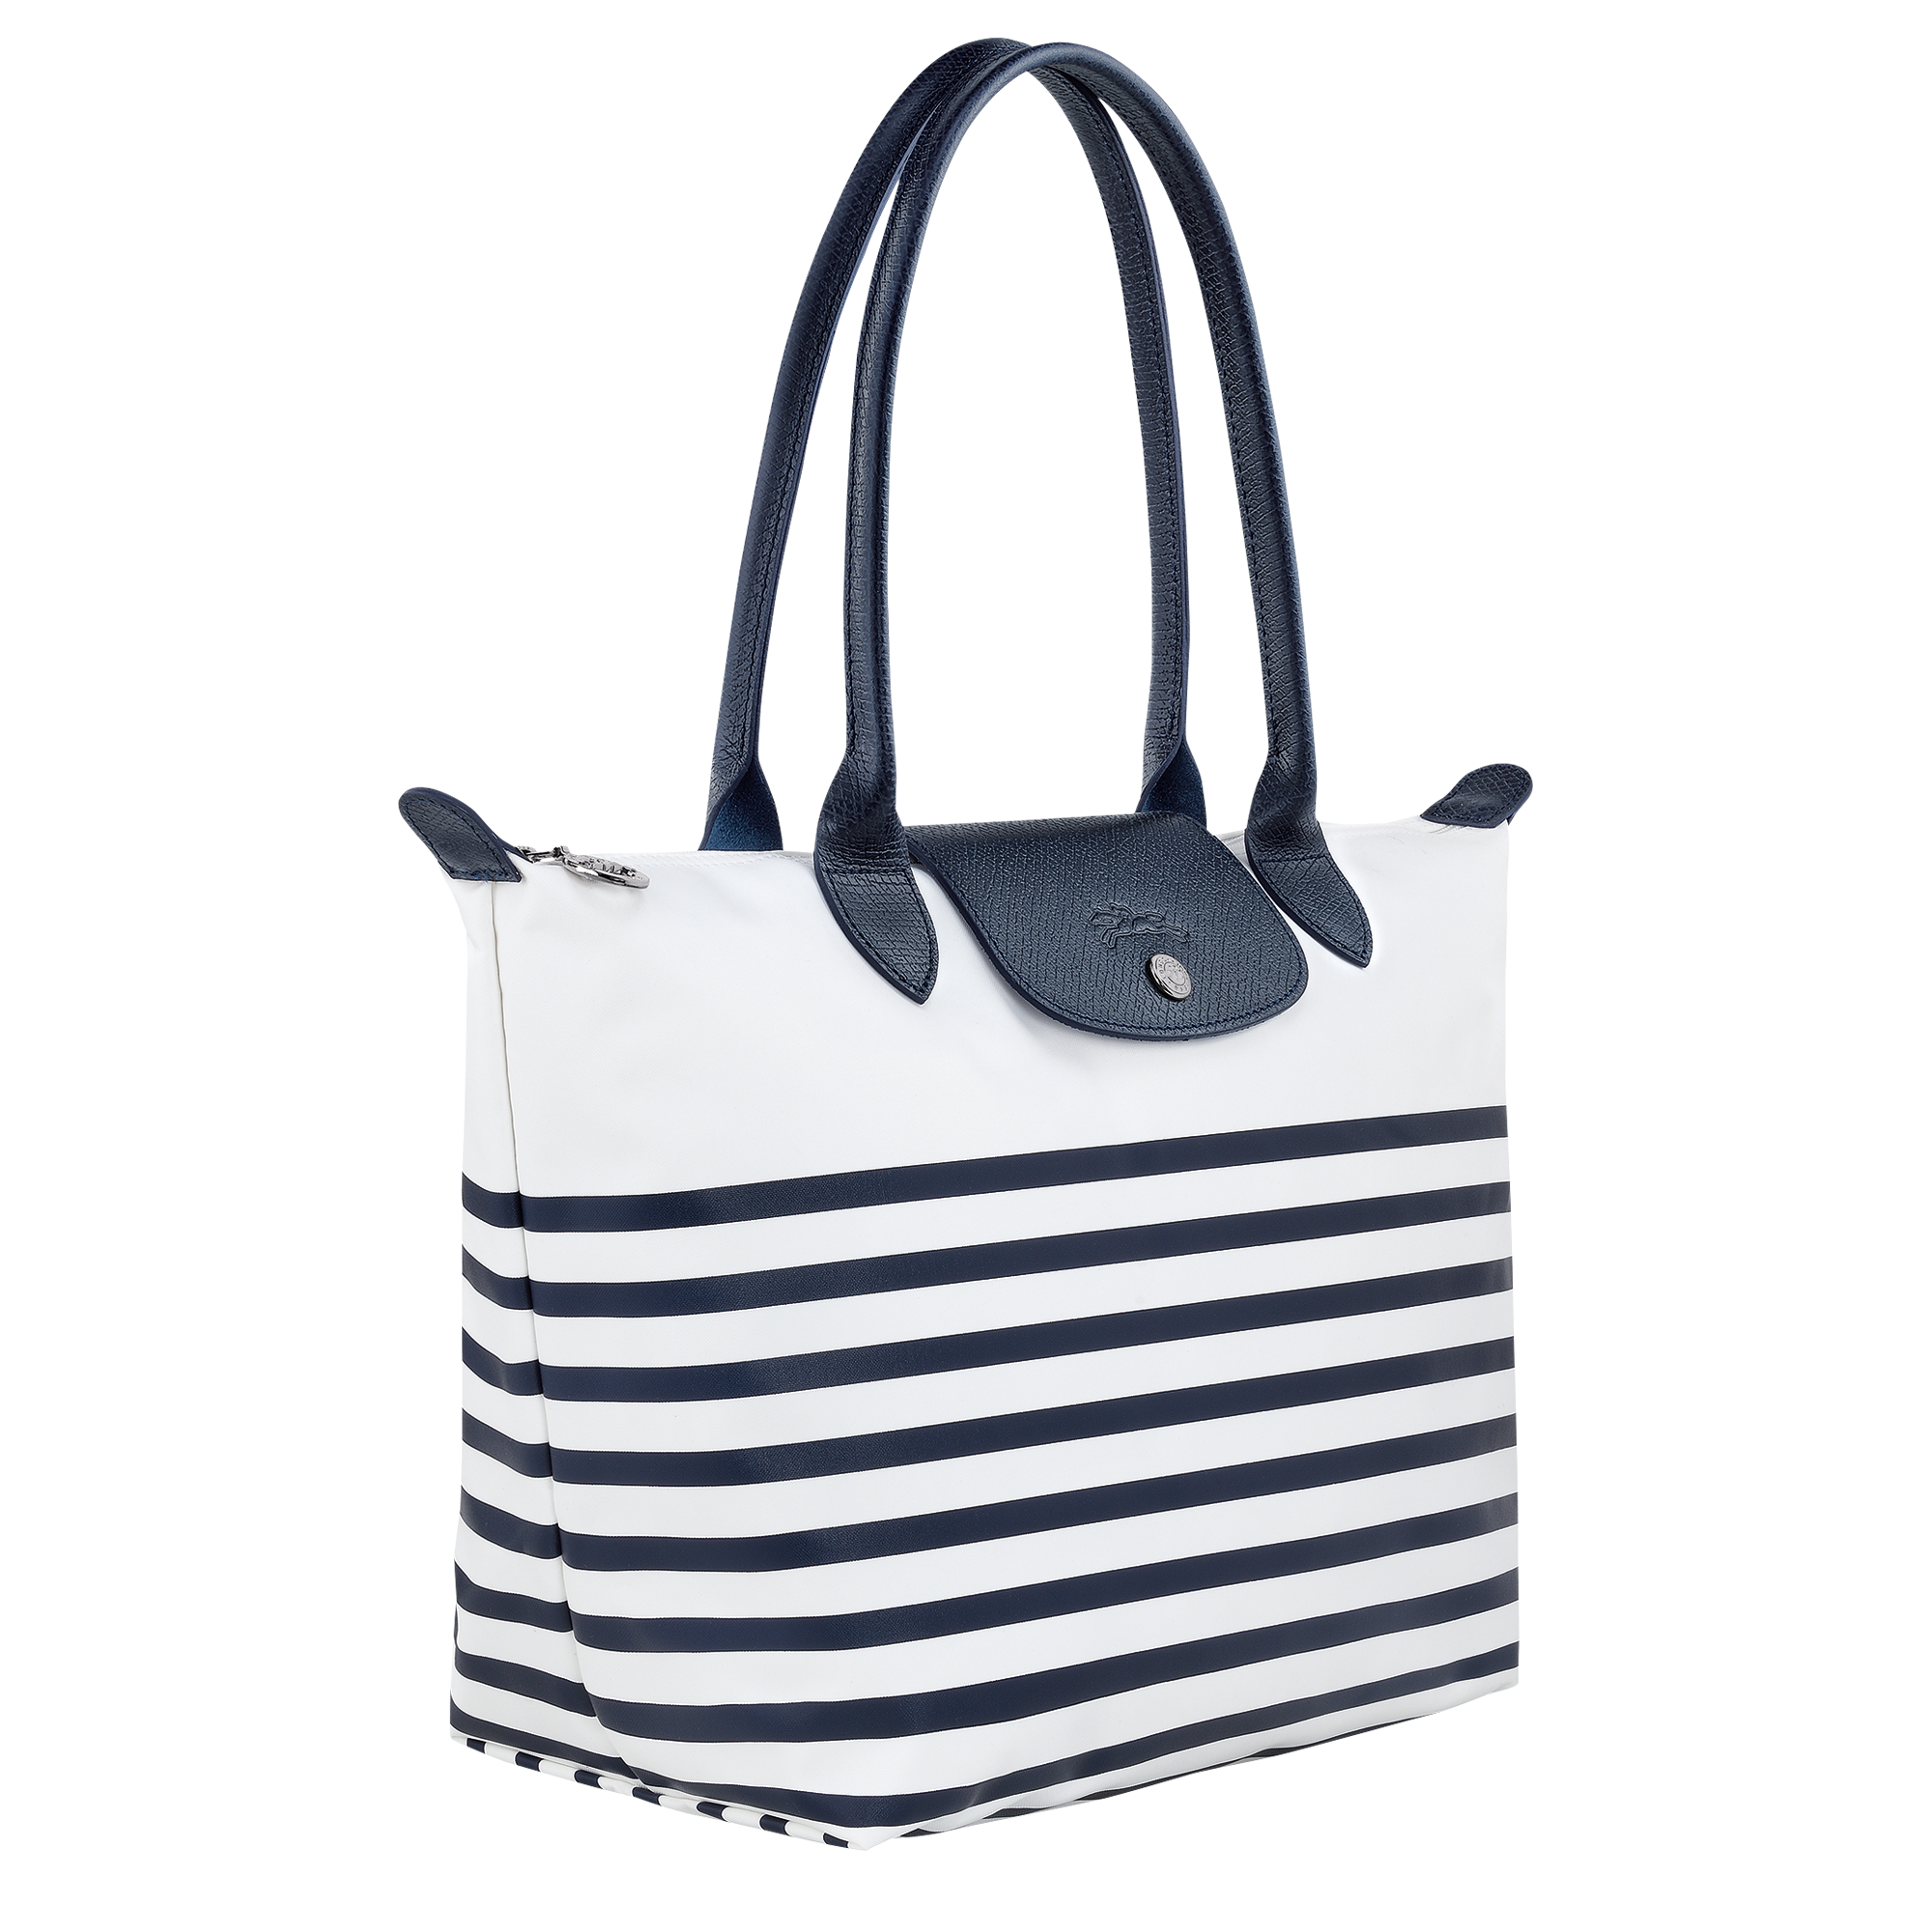 Longchamp LE PLIAGE COLLECTION - Tote bag M in Navy/White - 2 (SKU: L2605HDF165)